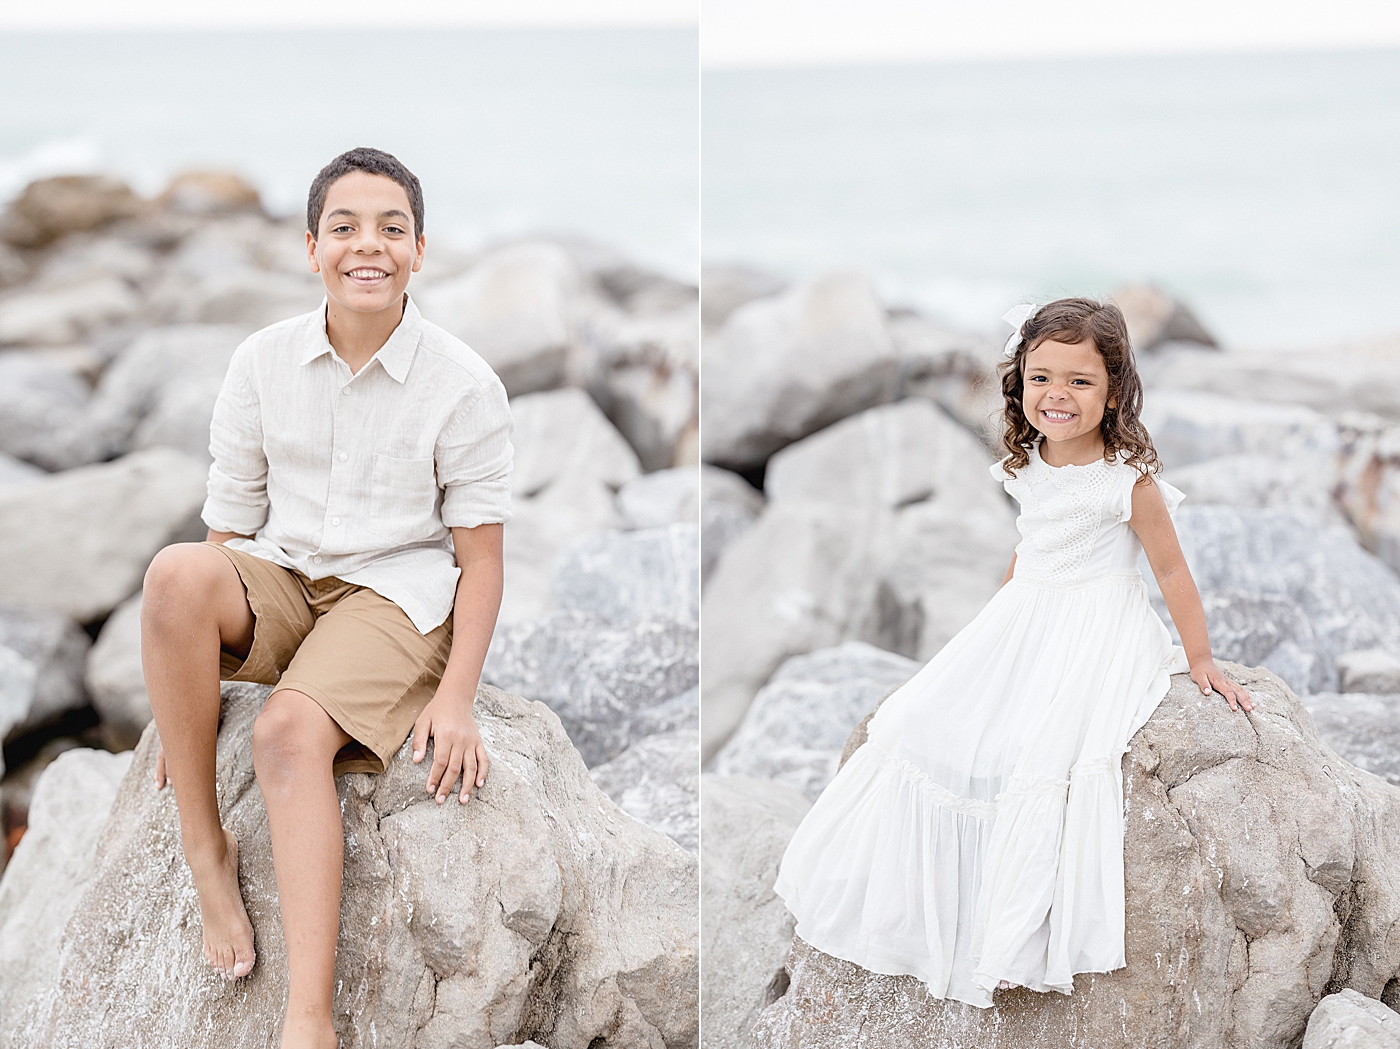 Children's portraits. Photo by Brittany Elise Photography.